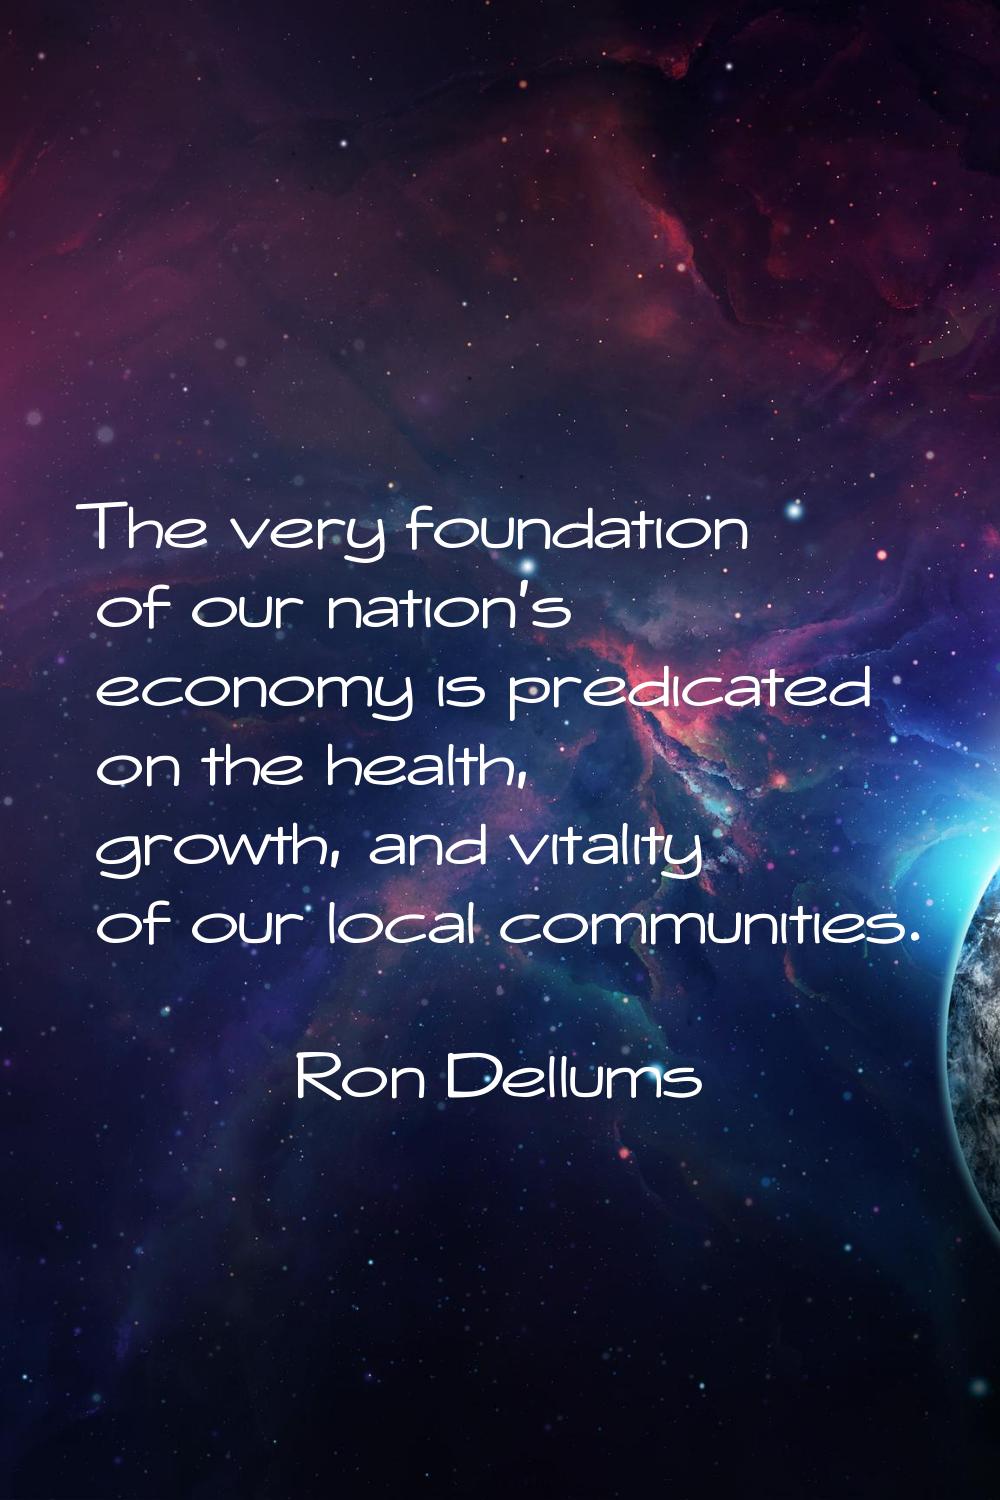 The very foundation of our nation's economy is predicated on the health, growth, and vitality of ou